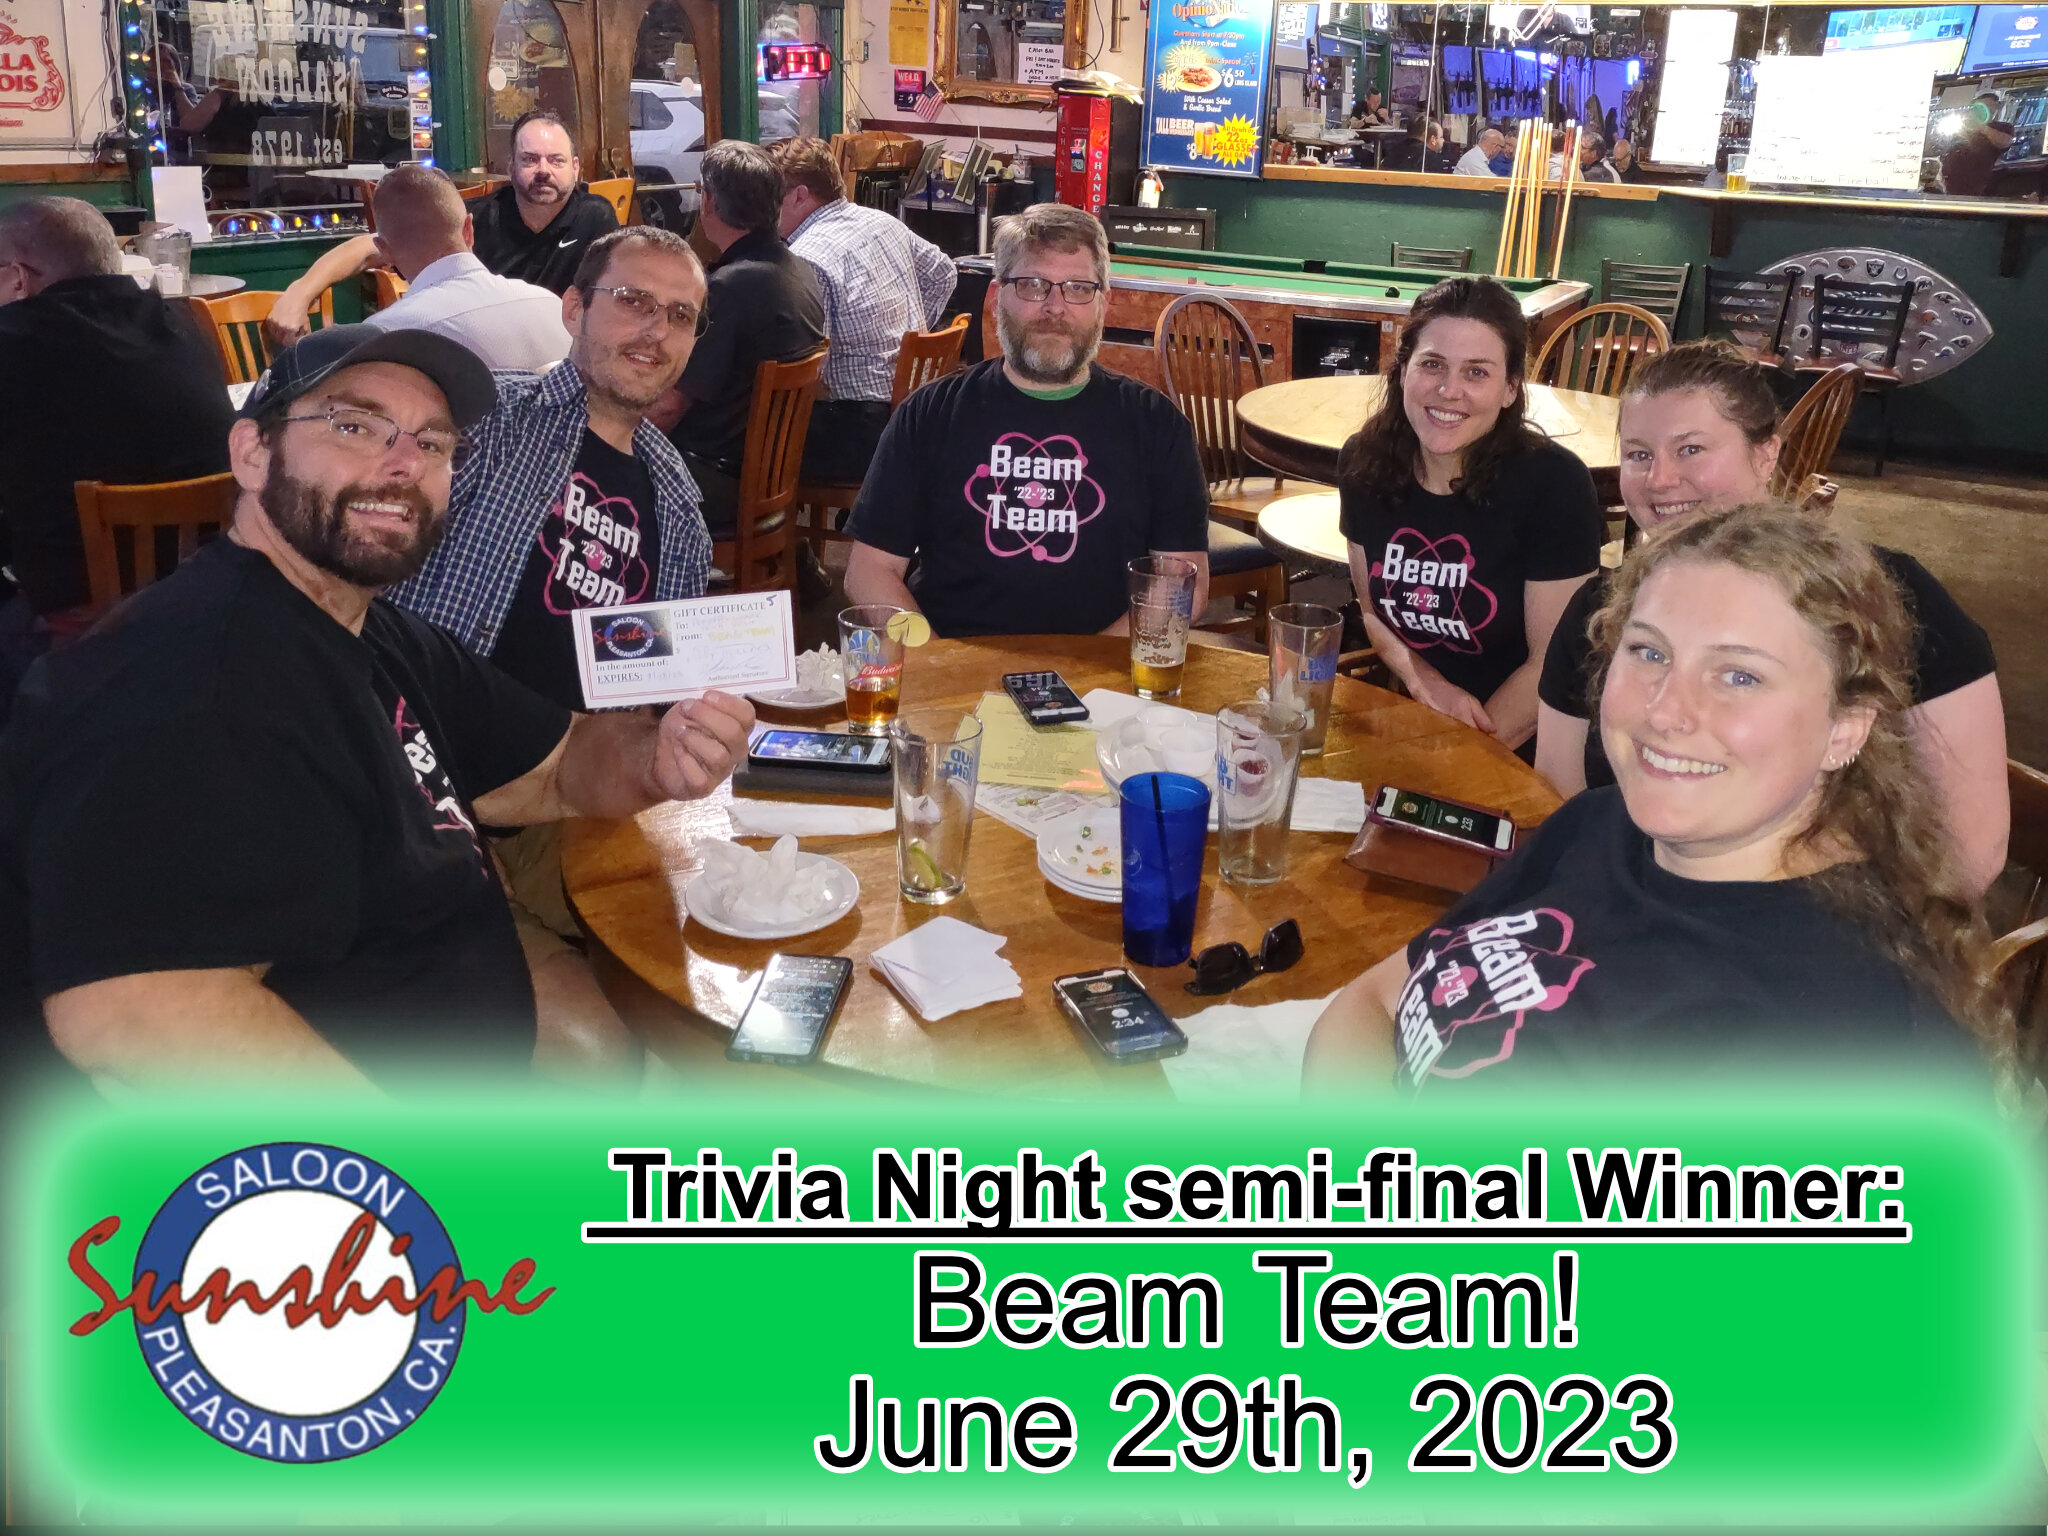 Congratulations to &quot;IDK Nothing&quot; for getting top score at last weeks Thursday night Trivia!

Join us Thursday night for multiple rounds of trivia, multiple chances to win a gift certificate, and multiple chances for a spot on the hall of fa